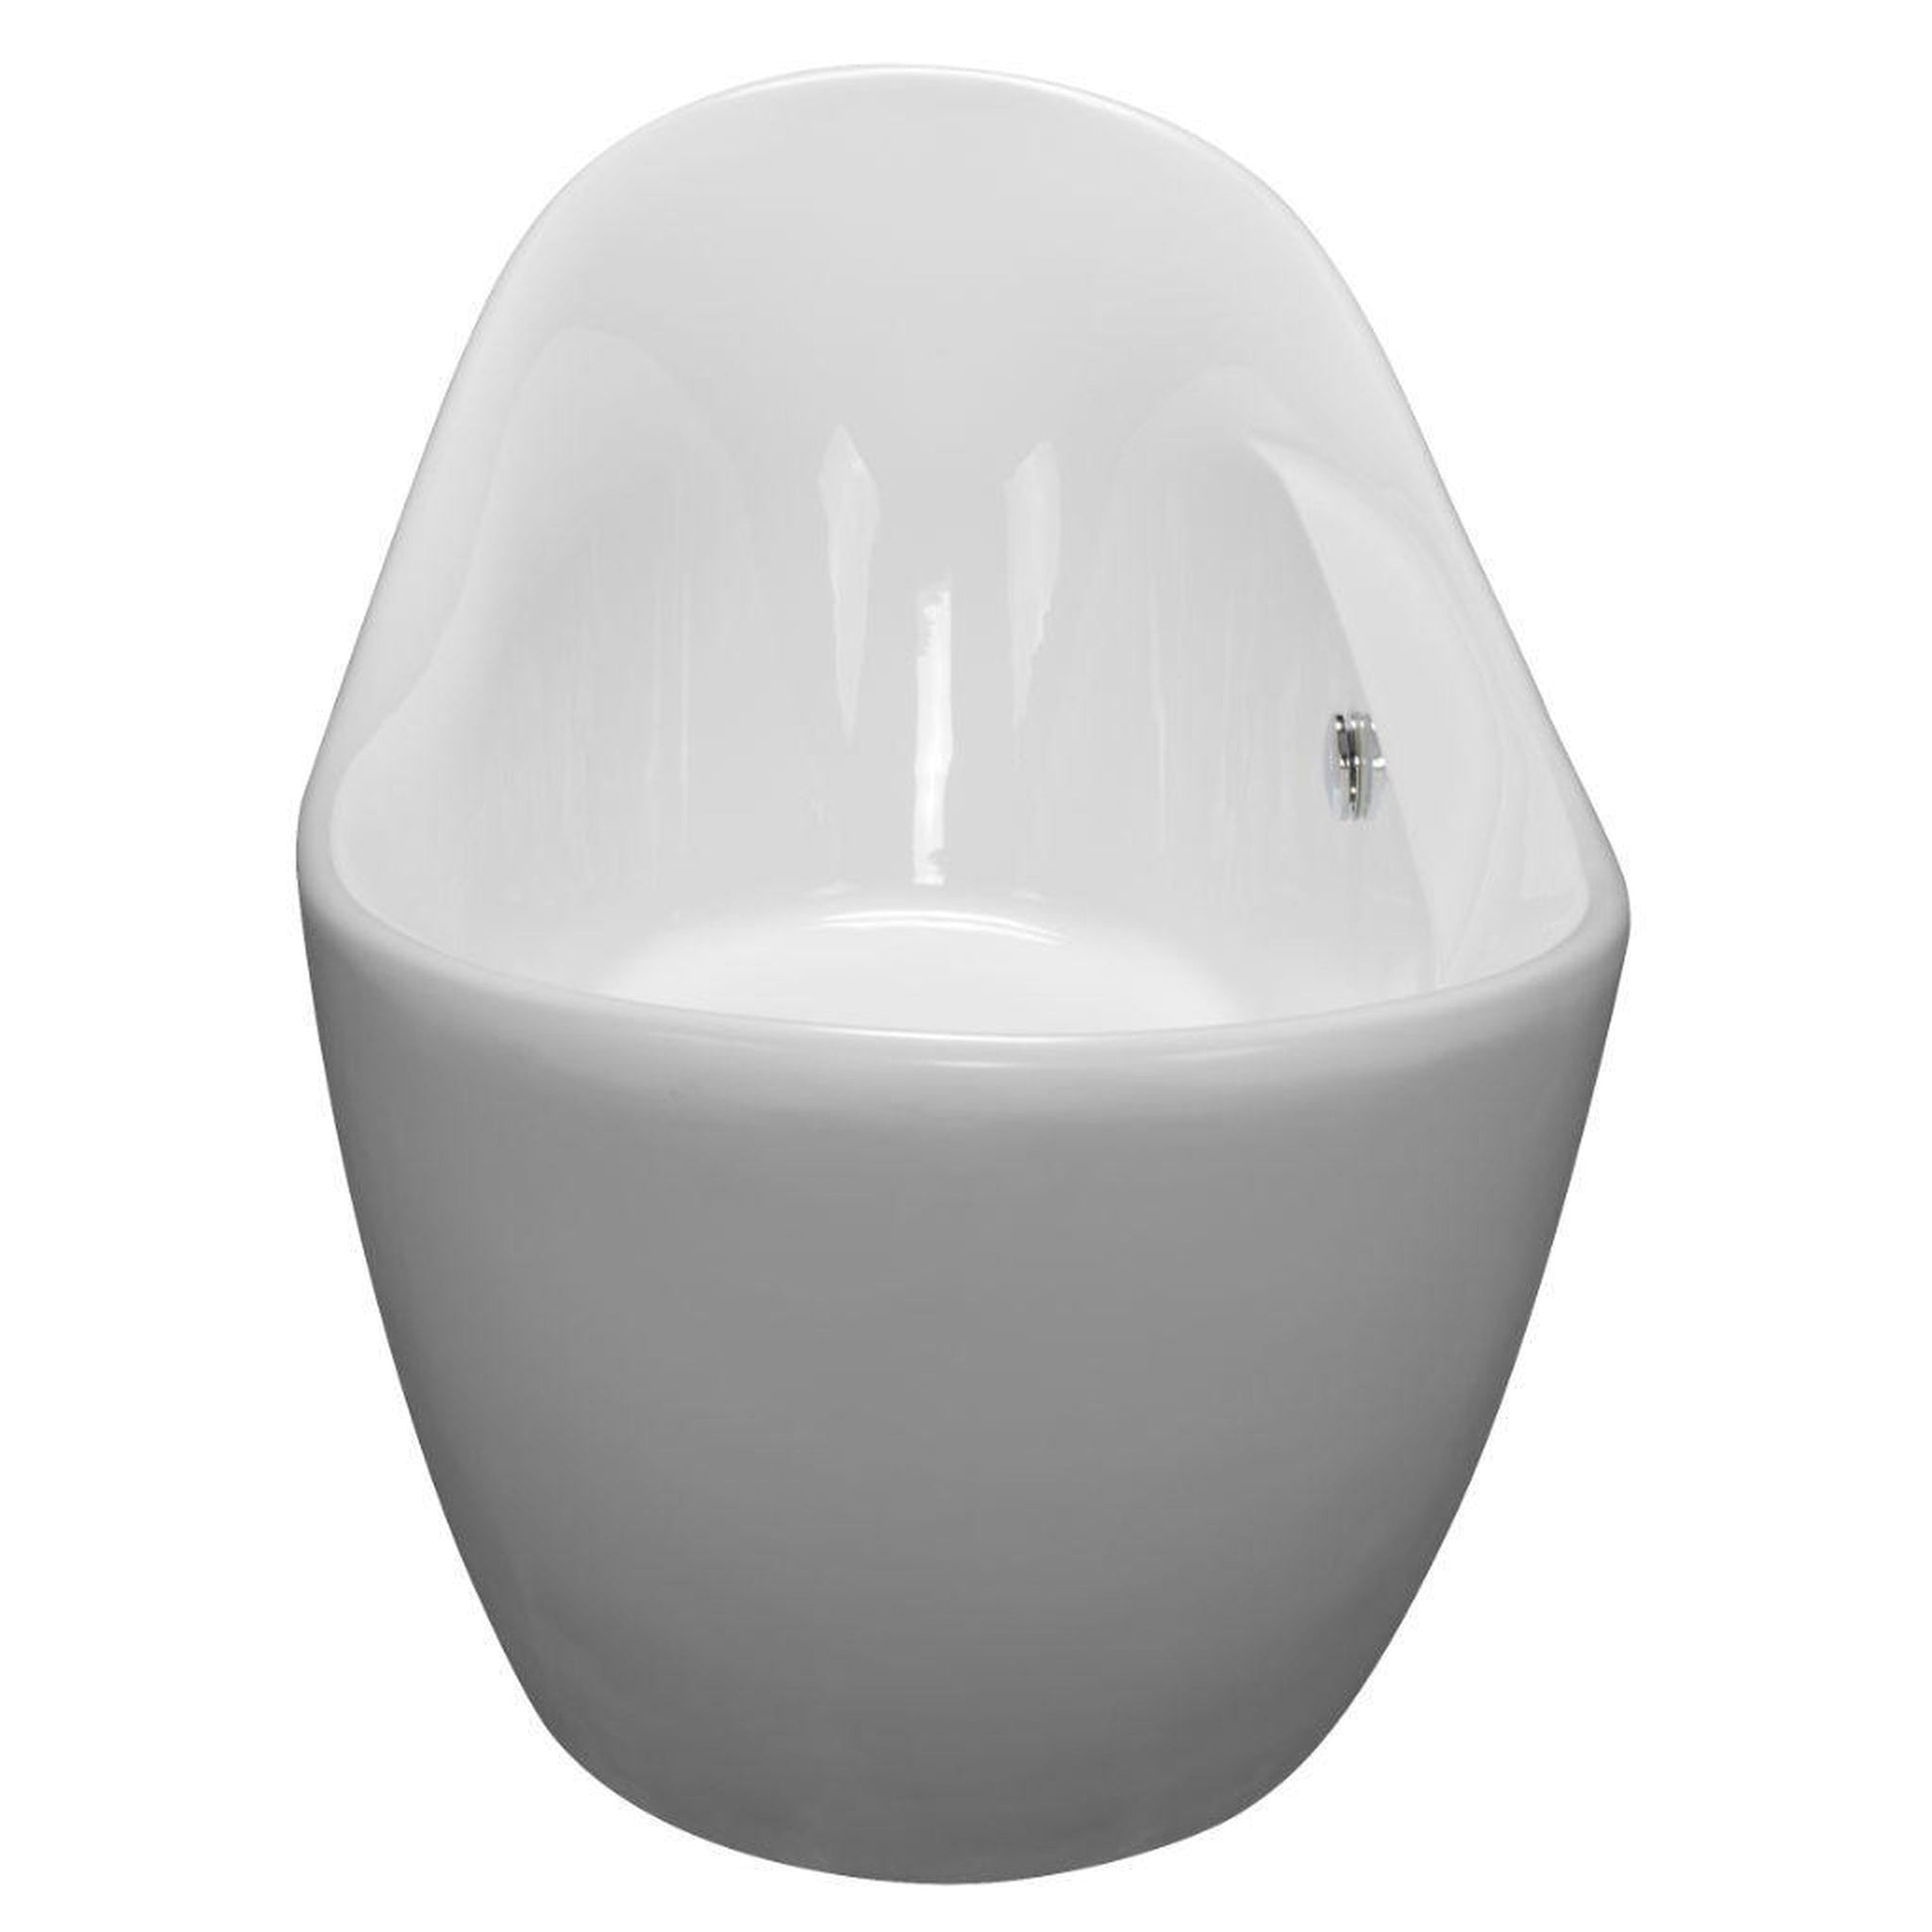 American Acrylic 67.75" x 29.125" White Slipper Style Freestanding With 16-Jet Air Massage System Bathtub